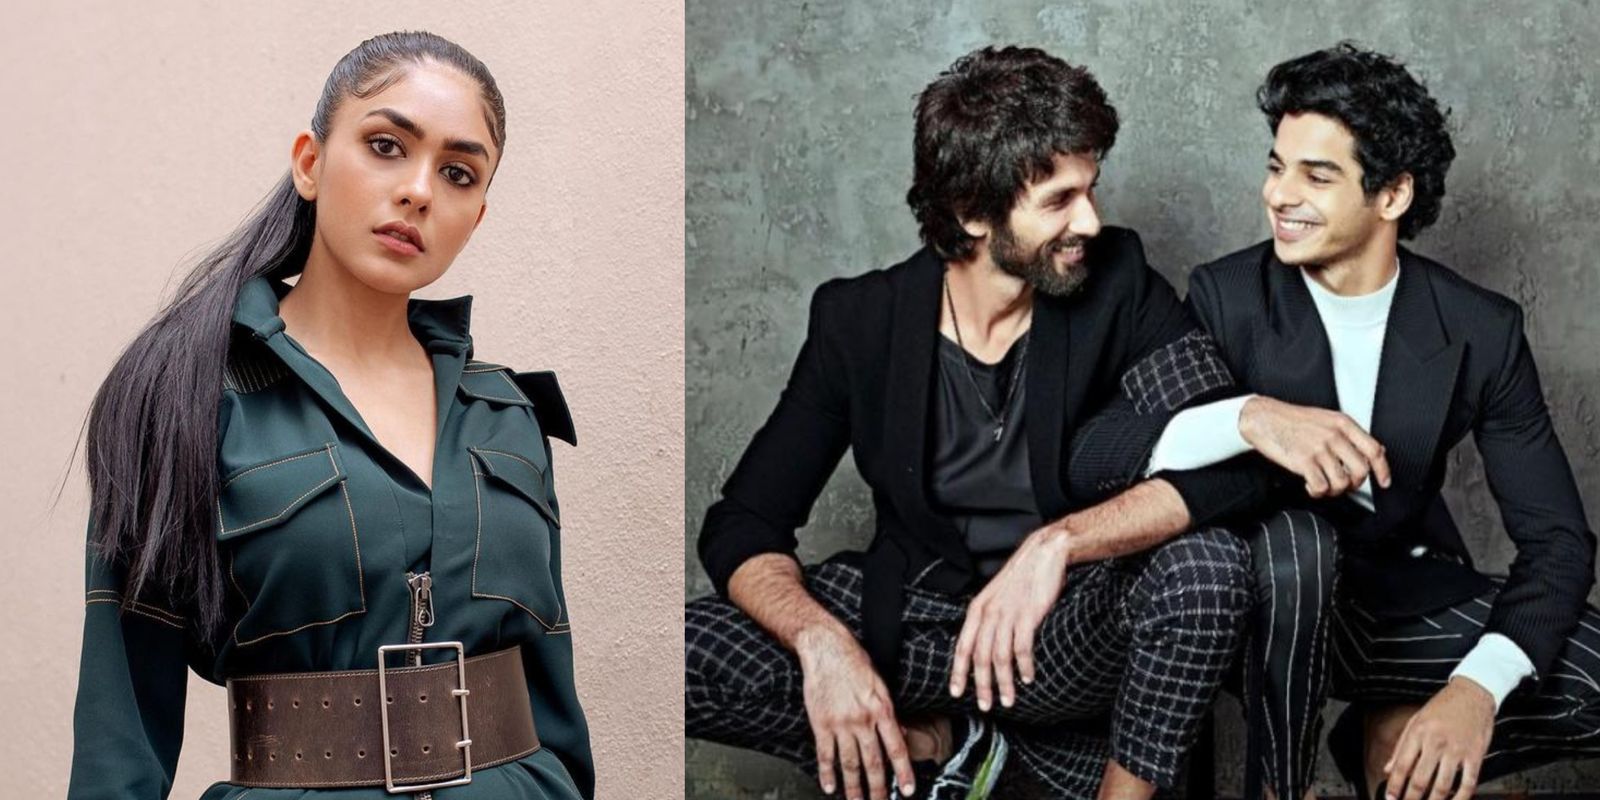 Mrunal Thakur opens up on working with Ishaan in Pippa after Shahid Kapoor’s Jersey; calls it a ‘beautiful coincidence’